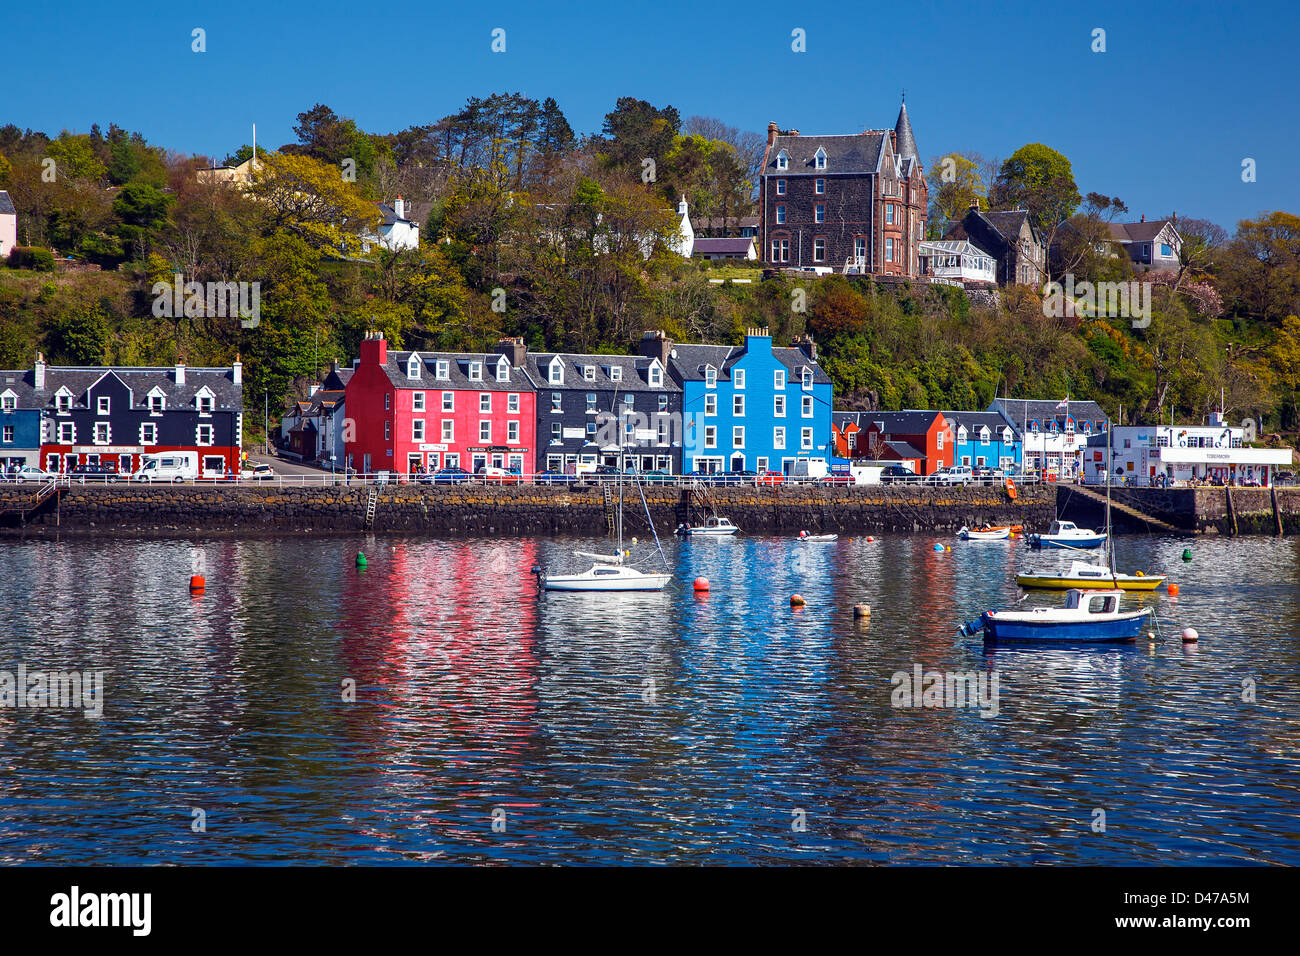 Tobermory, Isle of Mull, Scotland UK Banque D'Images